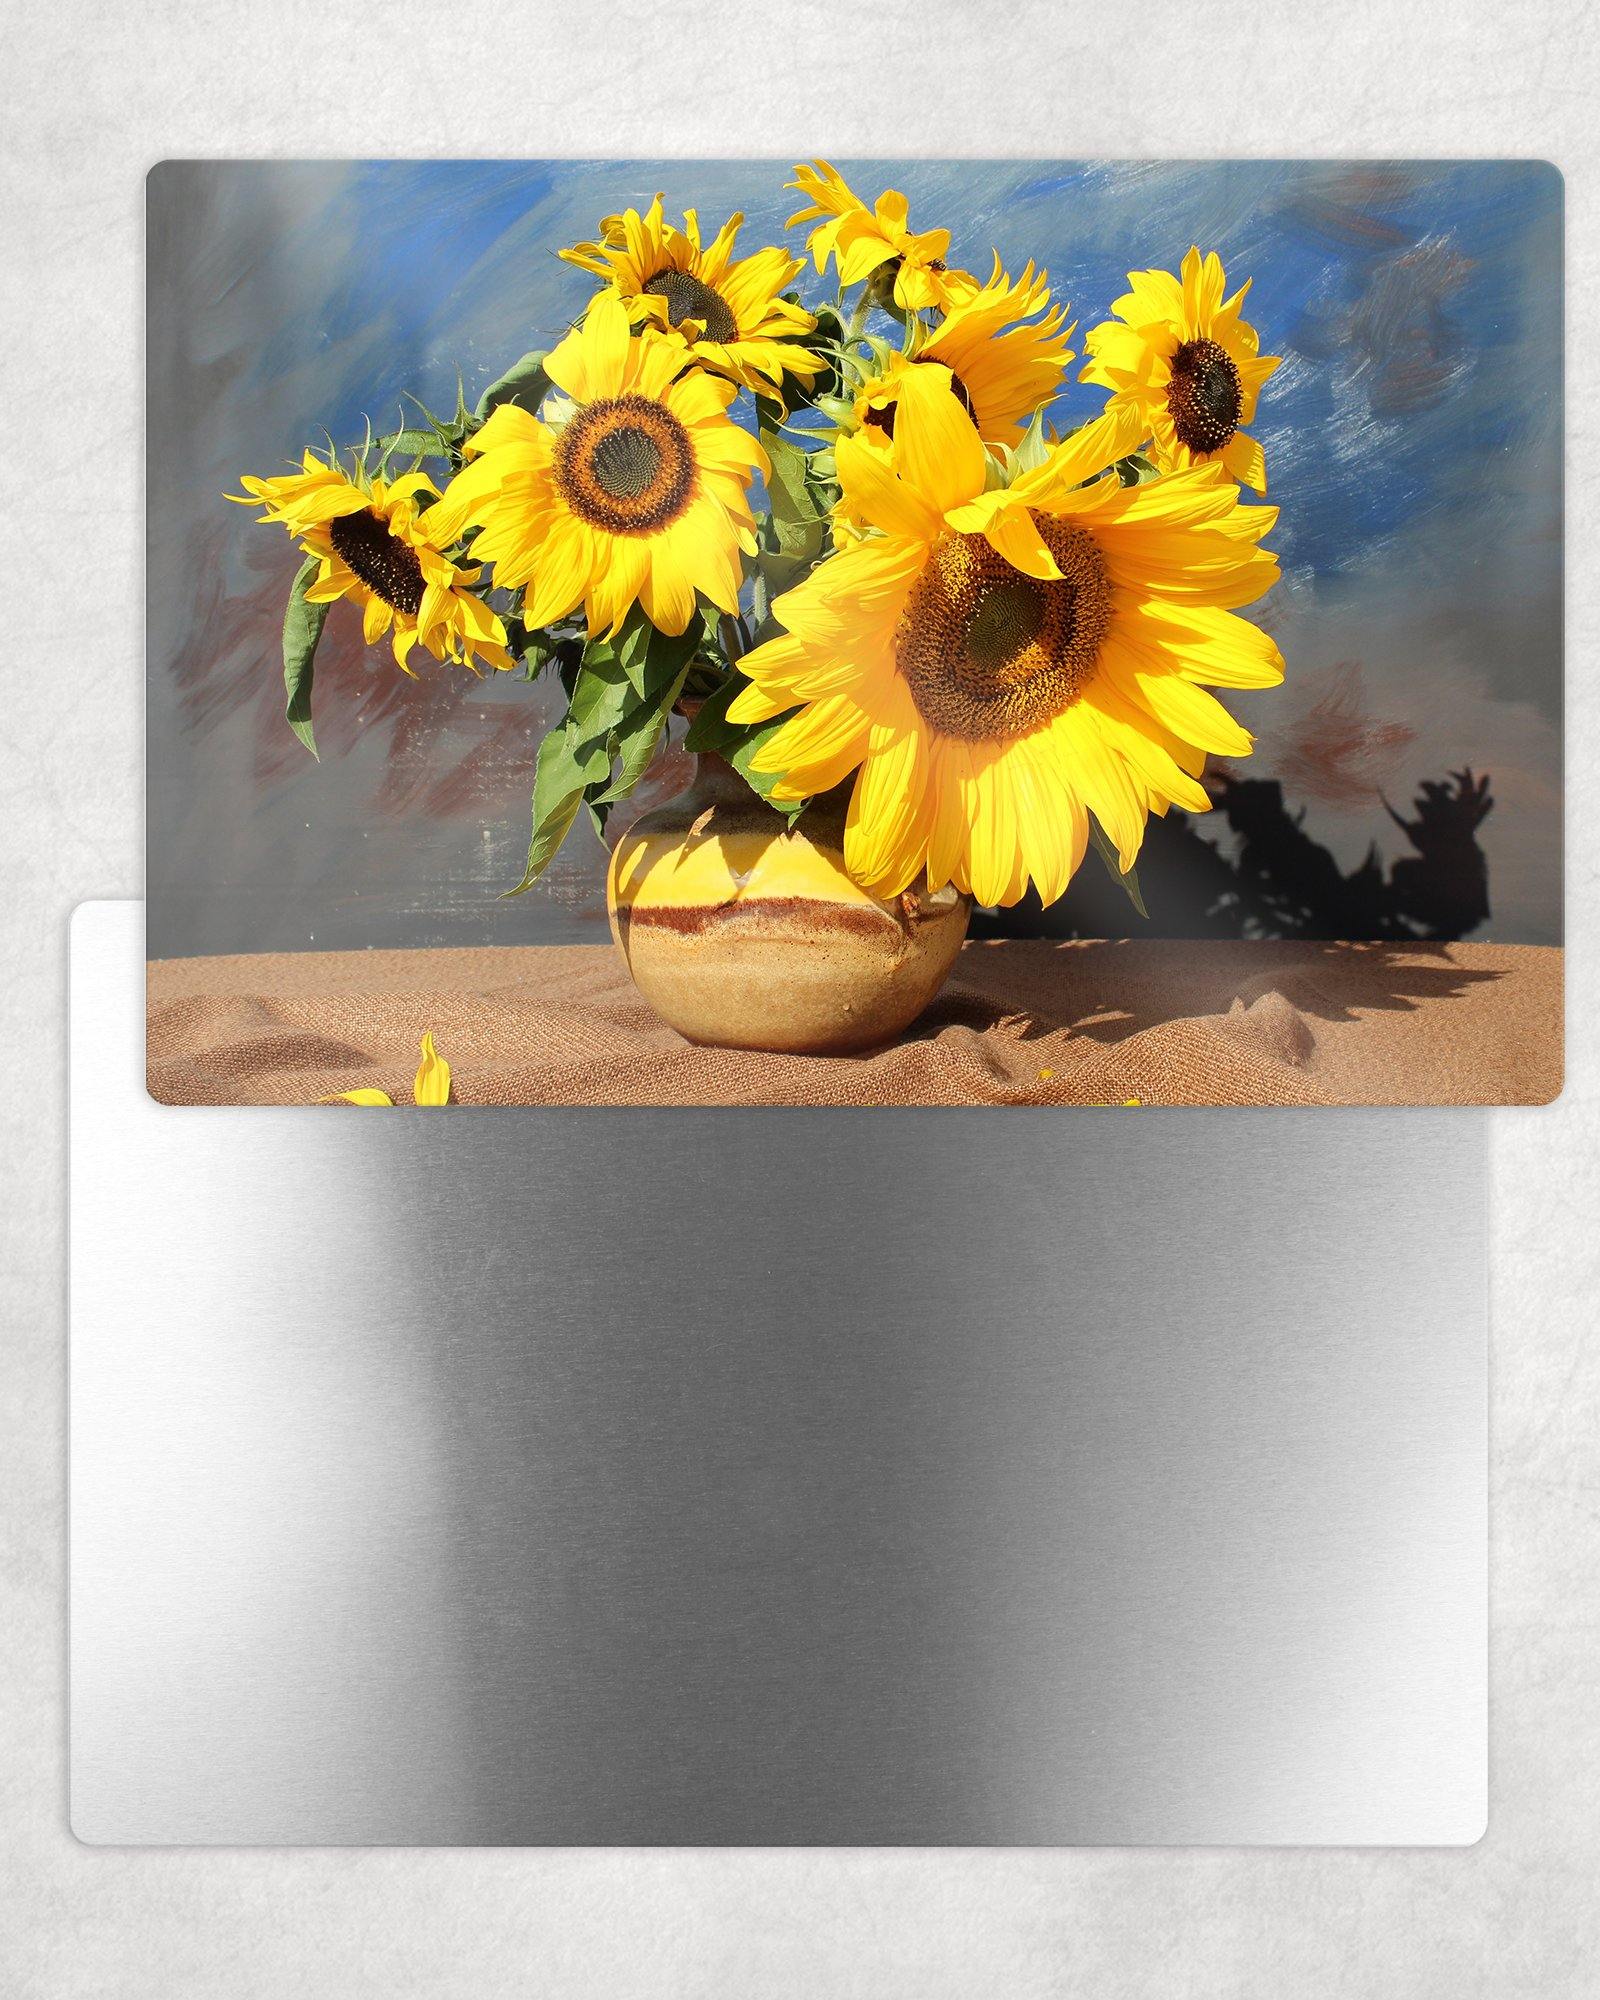 Sunflowers in Vase Still Life Photo Panel - 8x12 or 12x18 - Schoppix Gifts